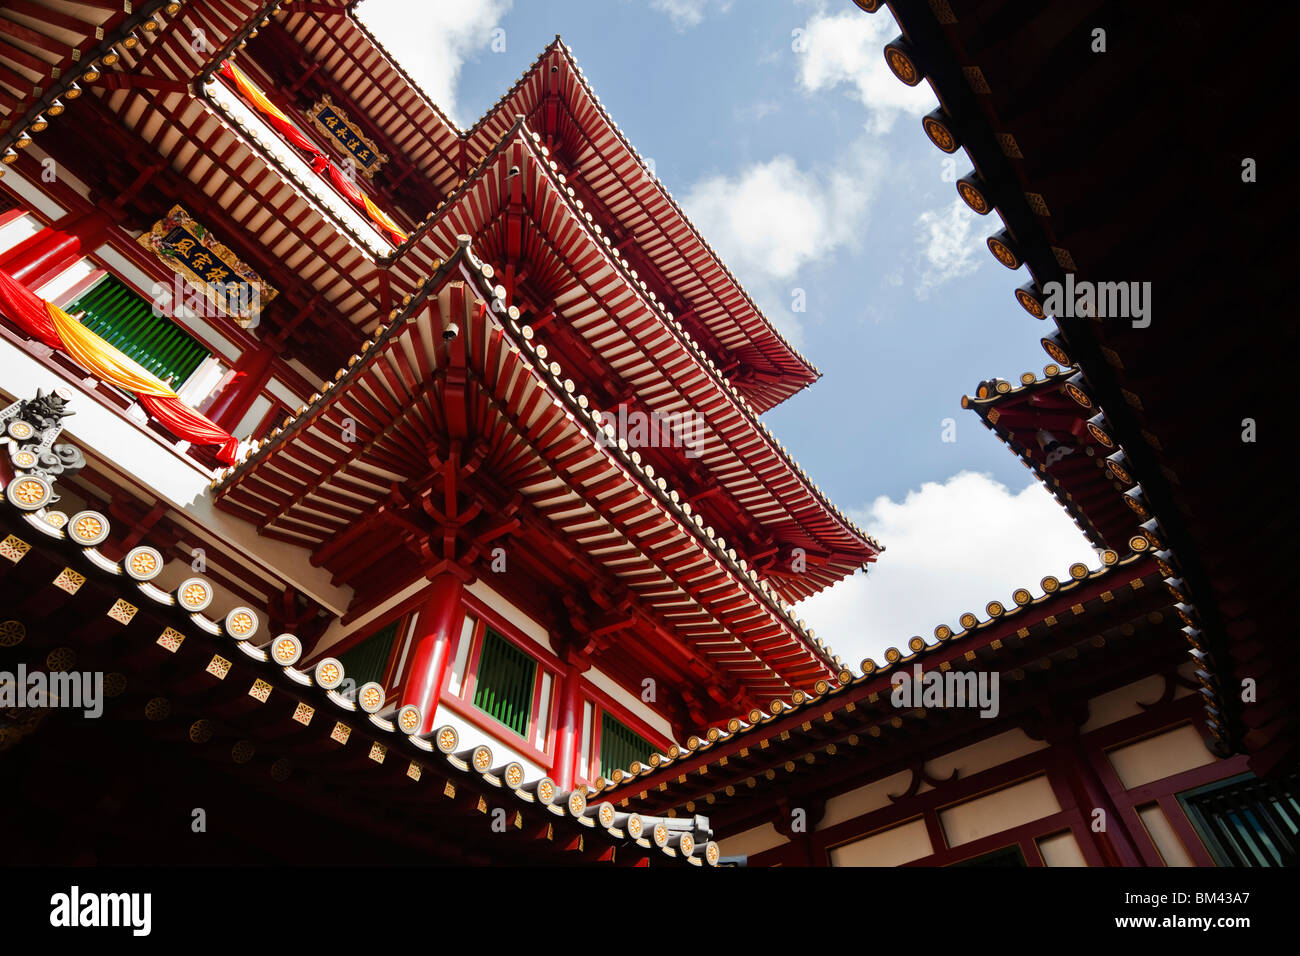 Buddha Tooth Relic Temple and Museum, Chinatown, Singapore Stock Photo